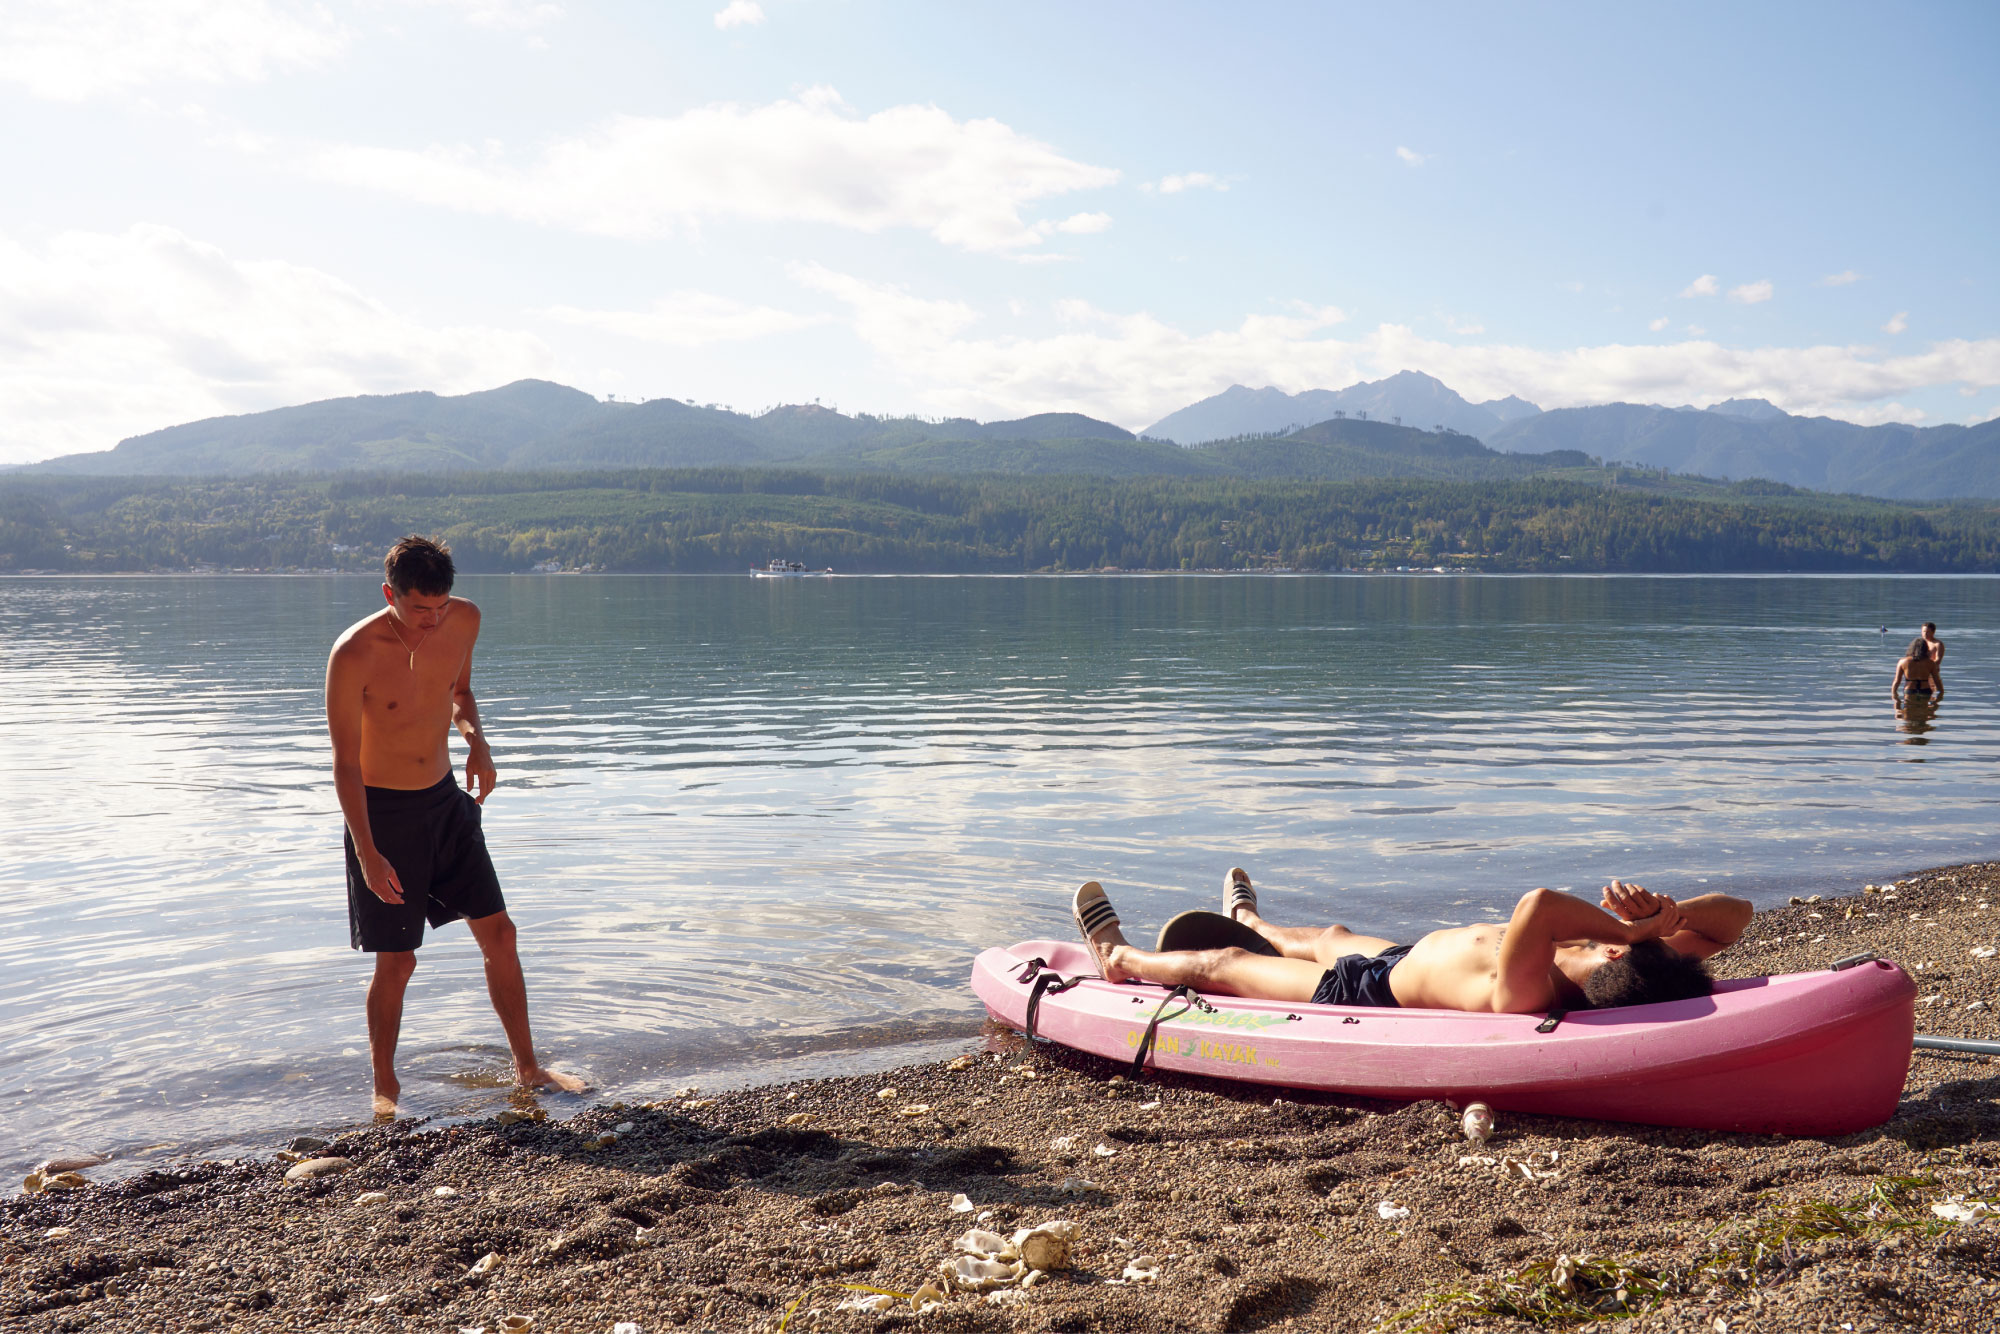 A man stands in the water by a lake, while another reclines inside of a nearby kayak.